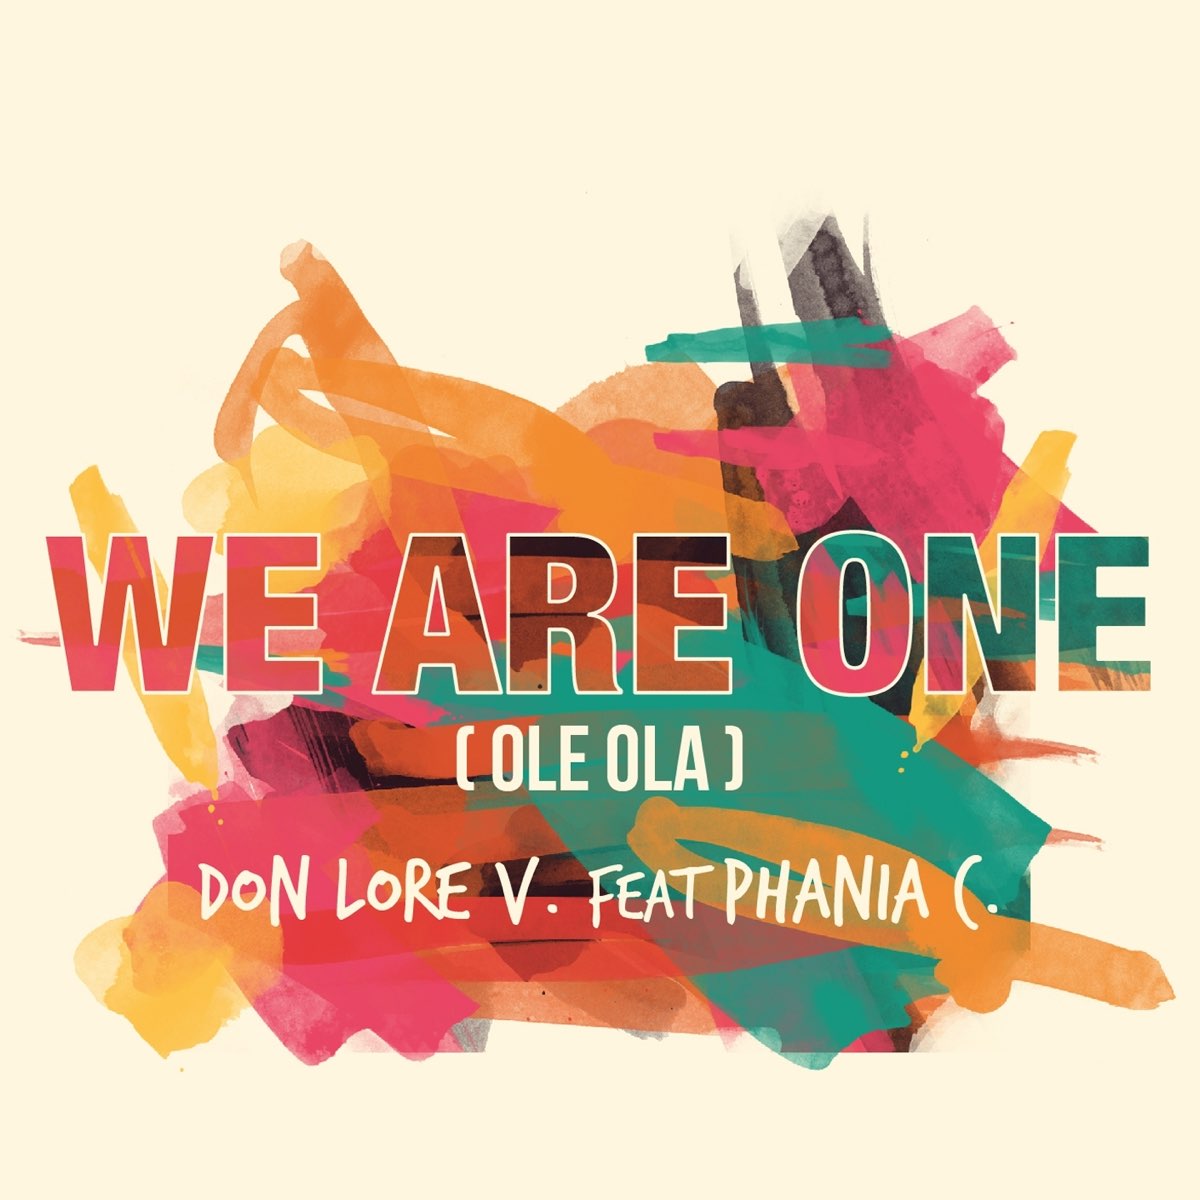 We are one. We are one ole Ola. Don Lore v. We are one ole Ola текст.